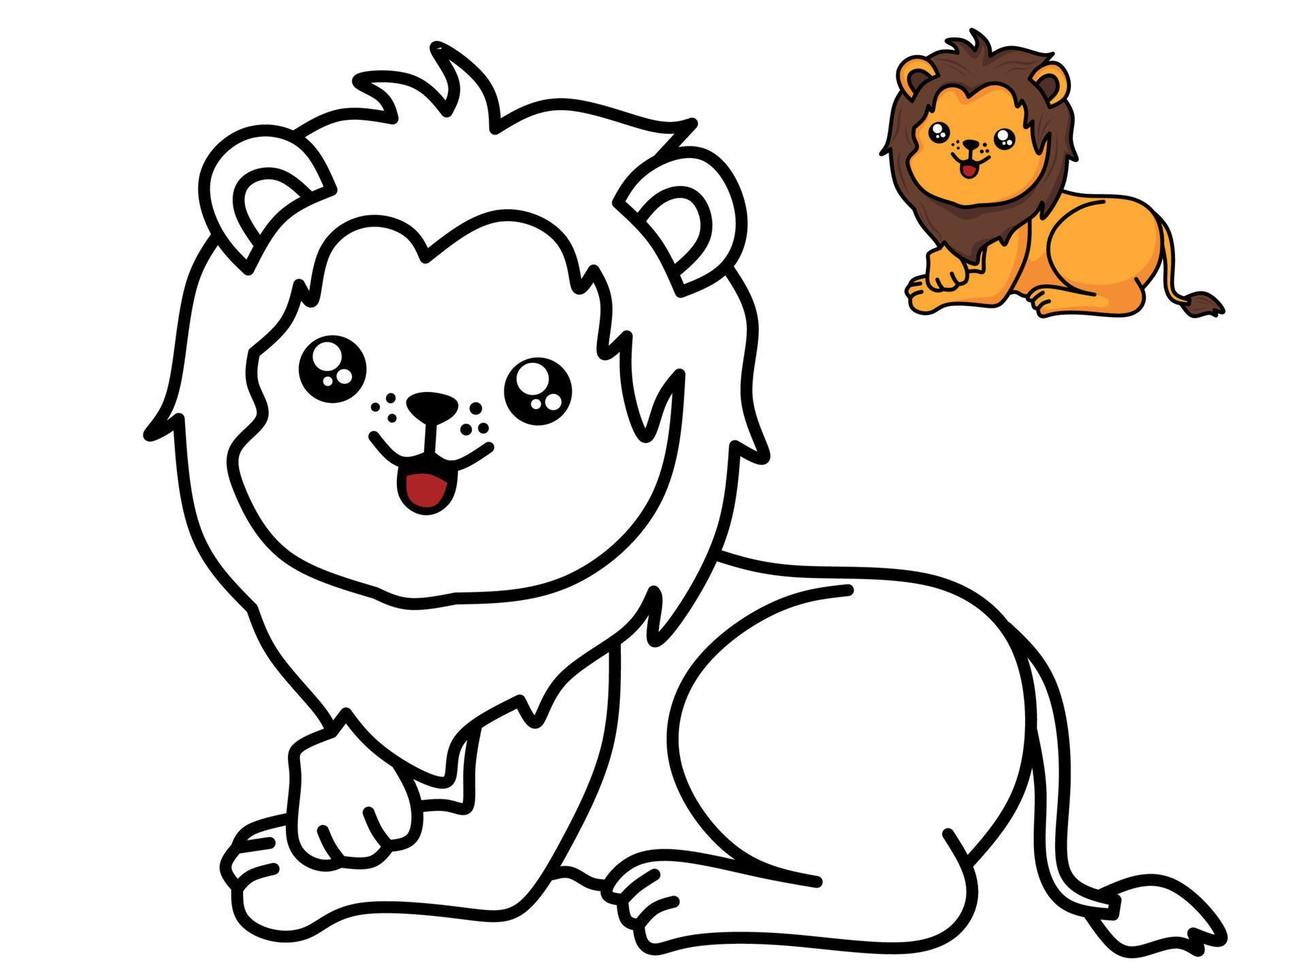 Lion cartoon for coloring page vector